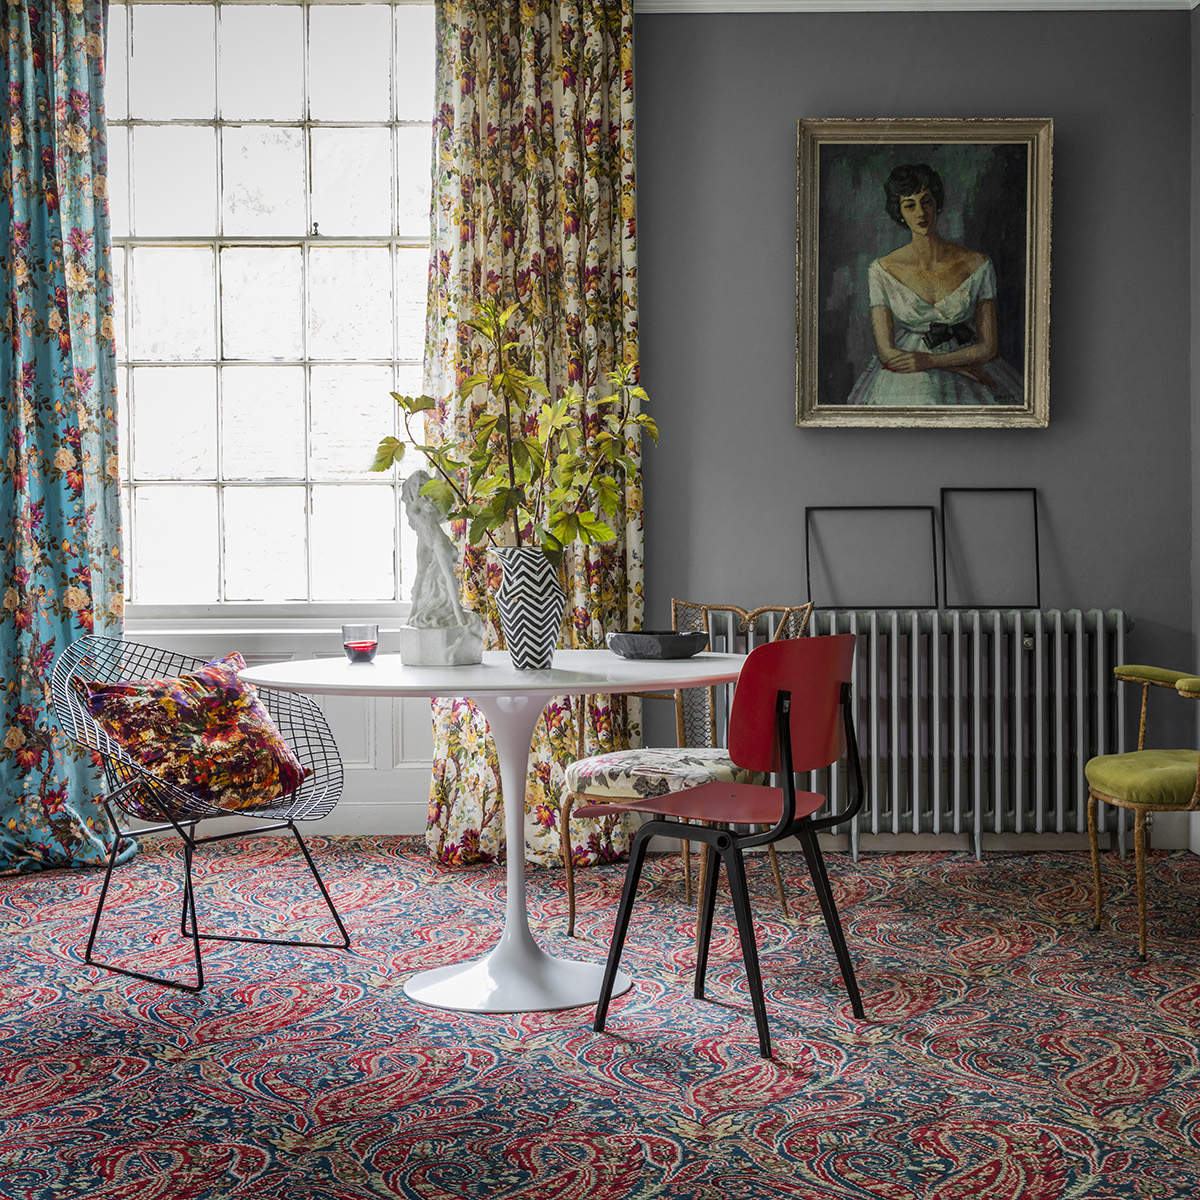 Pattern clashing can now include the floor. Sophie Robinson, colour and pattern queen shares her thoughts on how make your home stand out with style by opting for patterned carpet. #alternativeflooring #sophierobinson #patternclashing